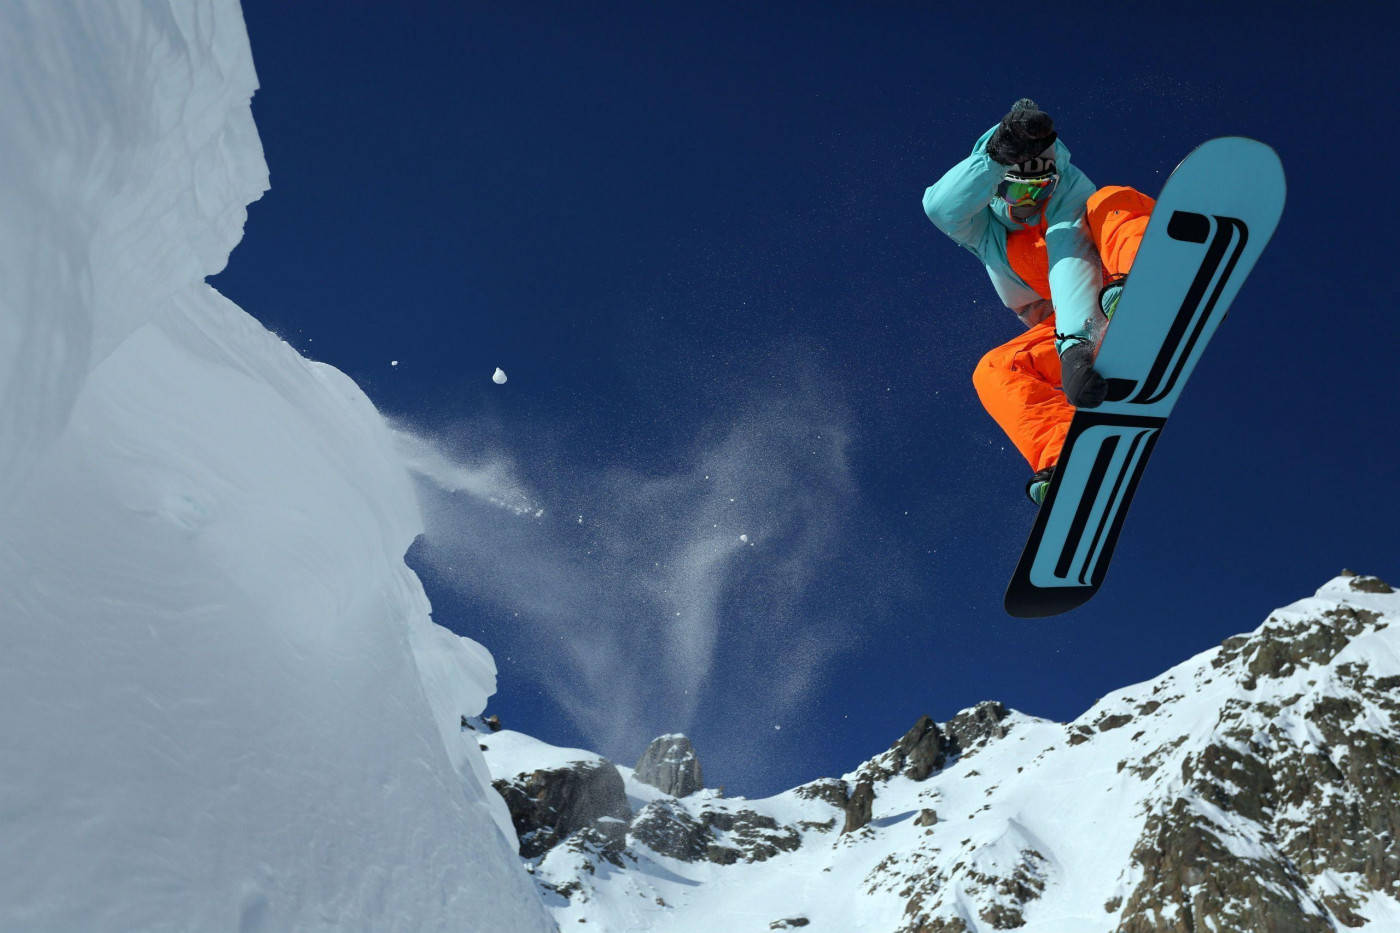 Man In Orange Descending With A Snowboard Background